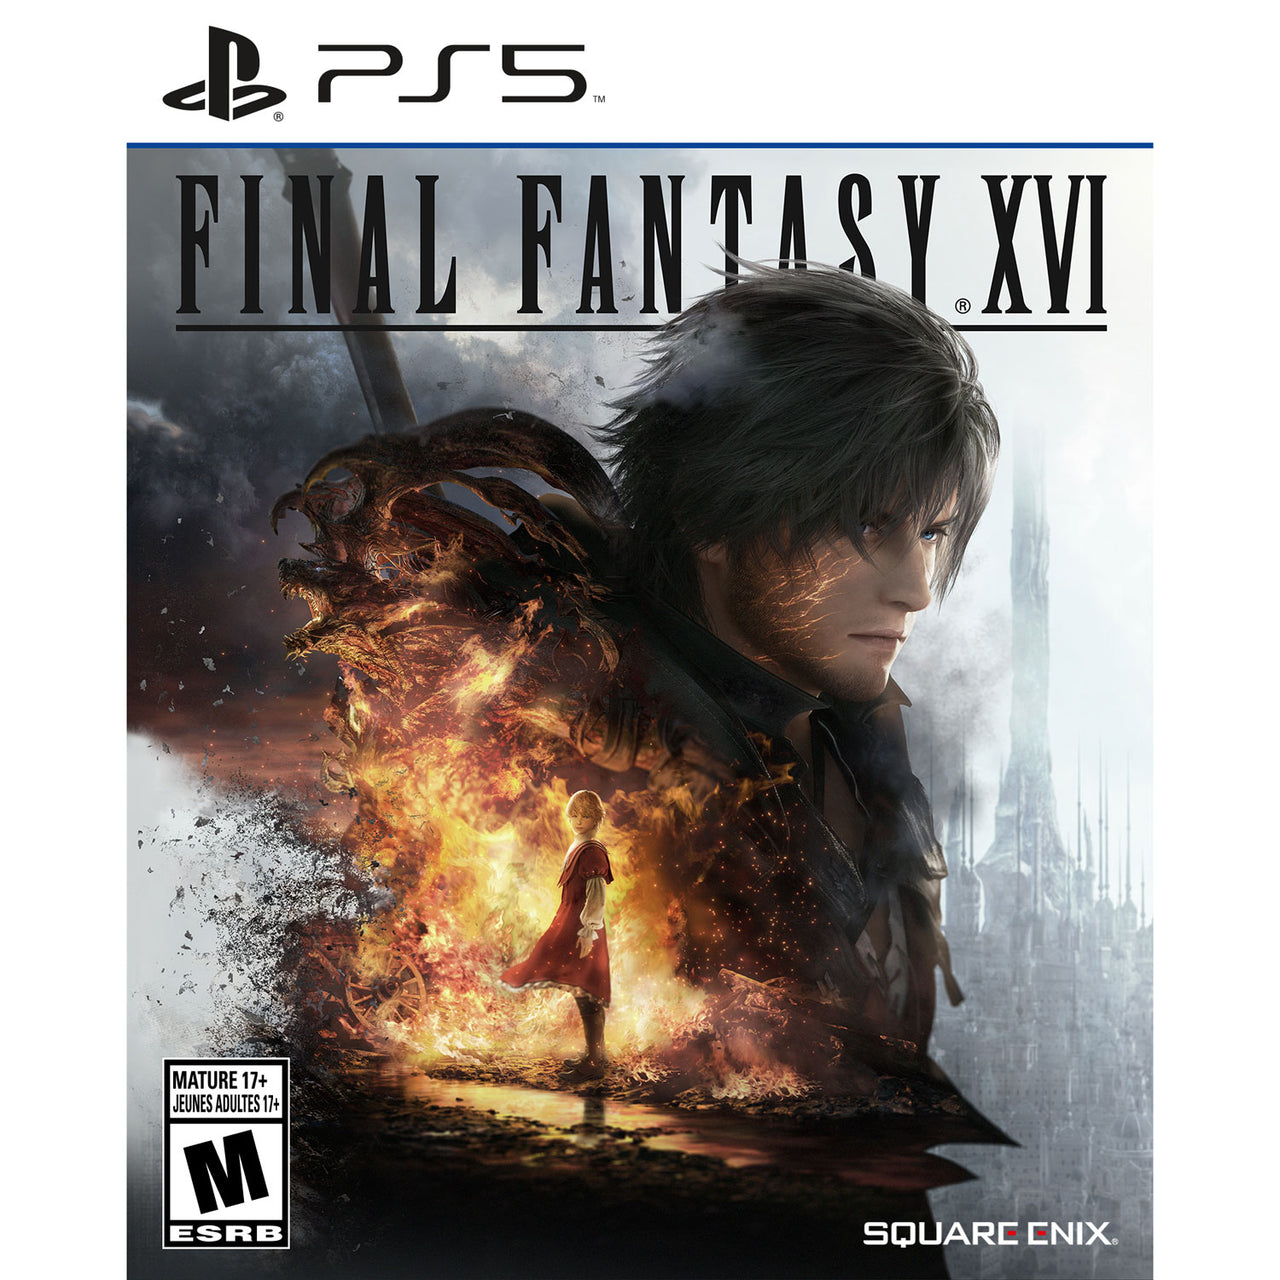 Final Fantasy XVI with SteelBook (PS5)